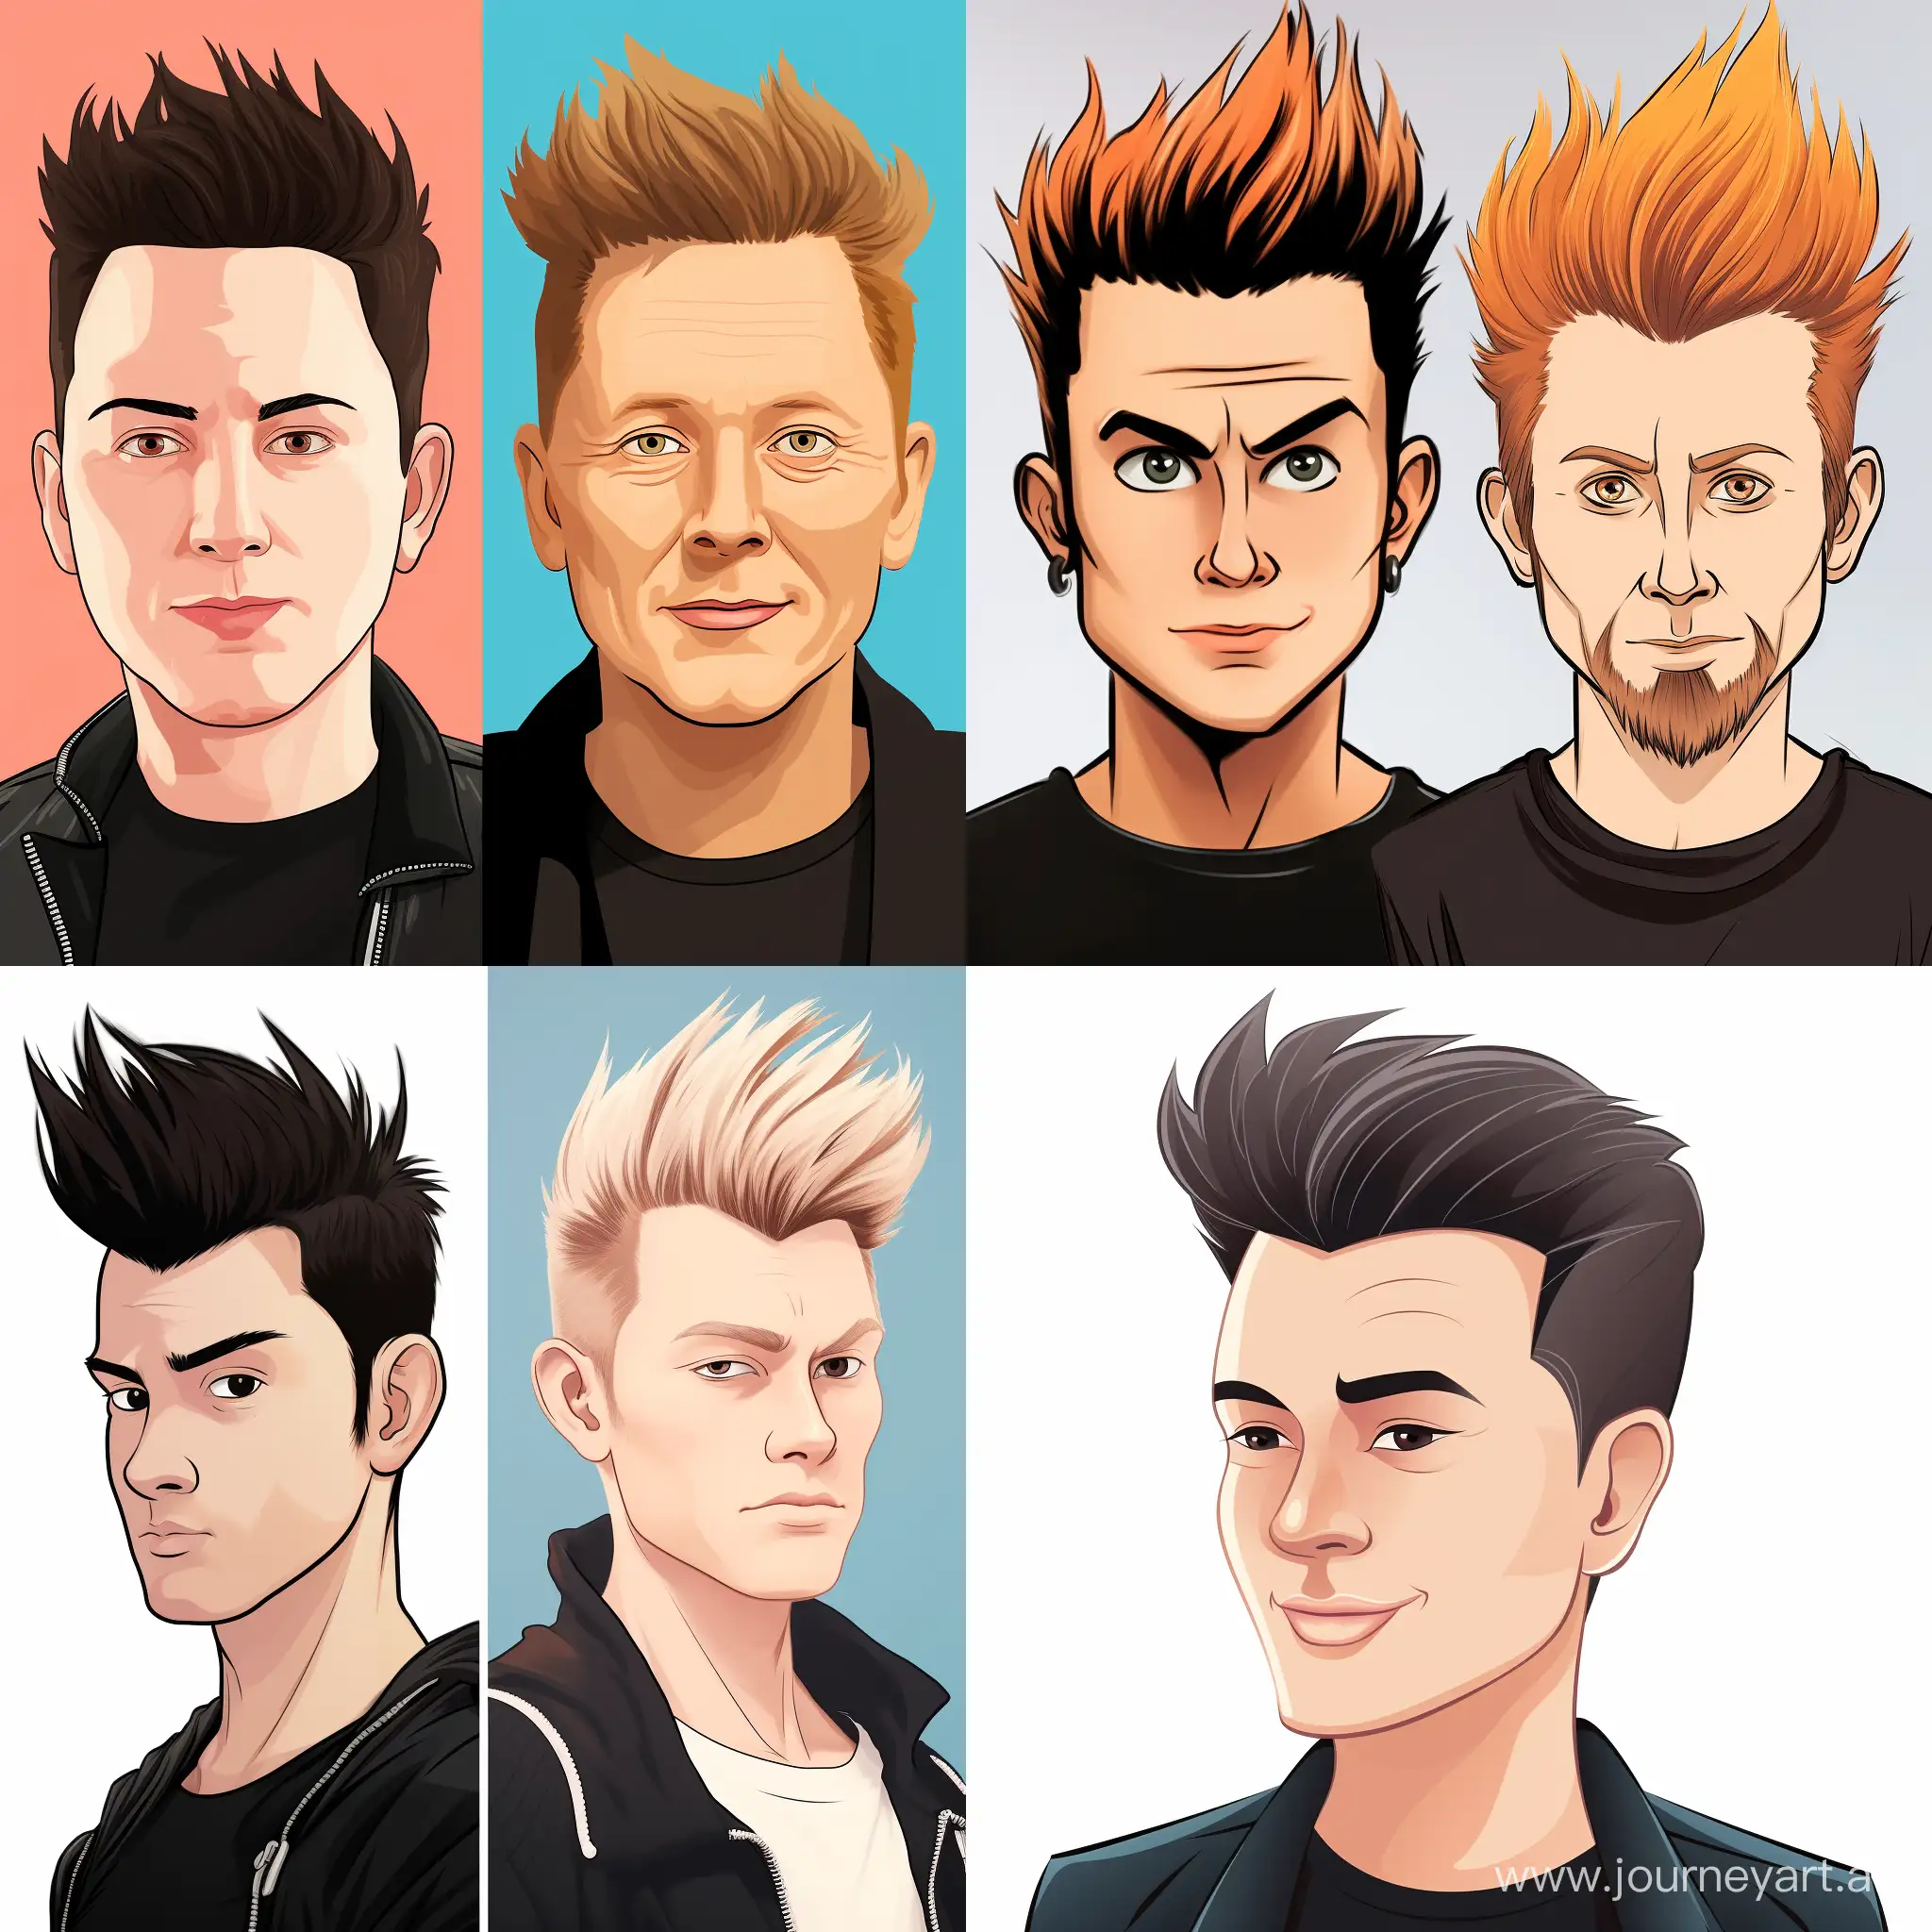 an amazing fact about Elon Musk, short quiff hairstyle dyed in 2 colors white and black, fun cartoon style